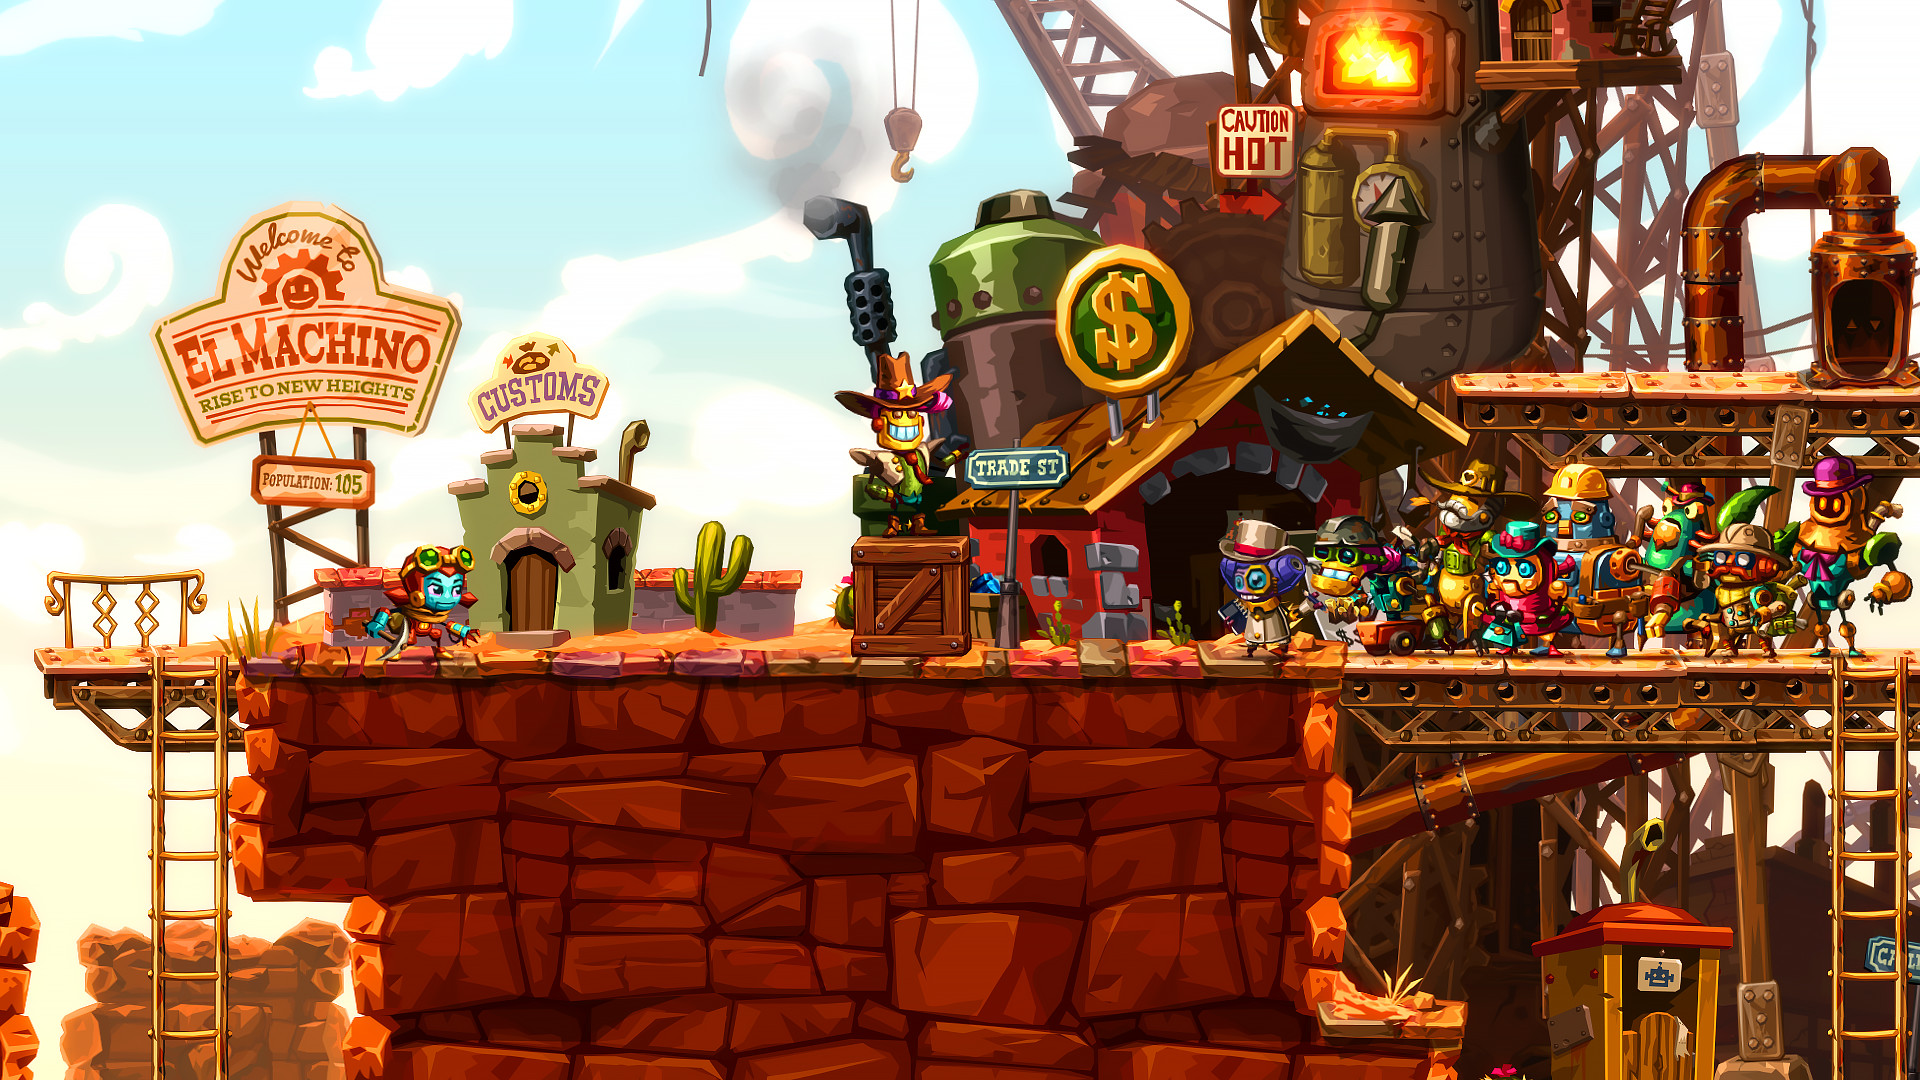 HD desktop wallpaper of SteamWorld Dig 2 featuring vibrant artwork of the game's western mining town environment and robotic characters.